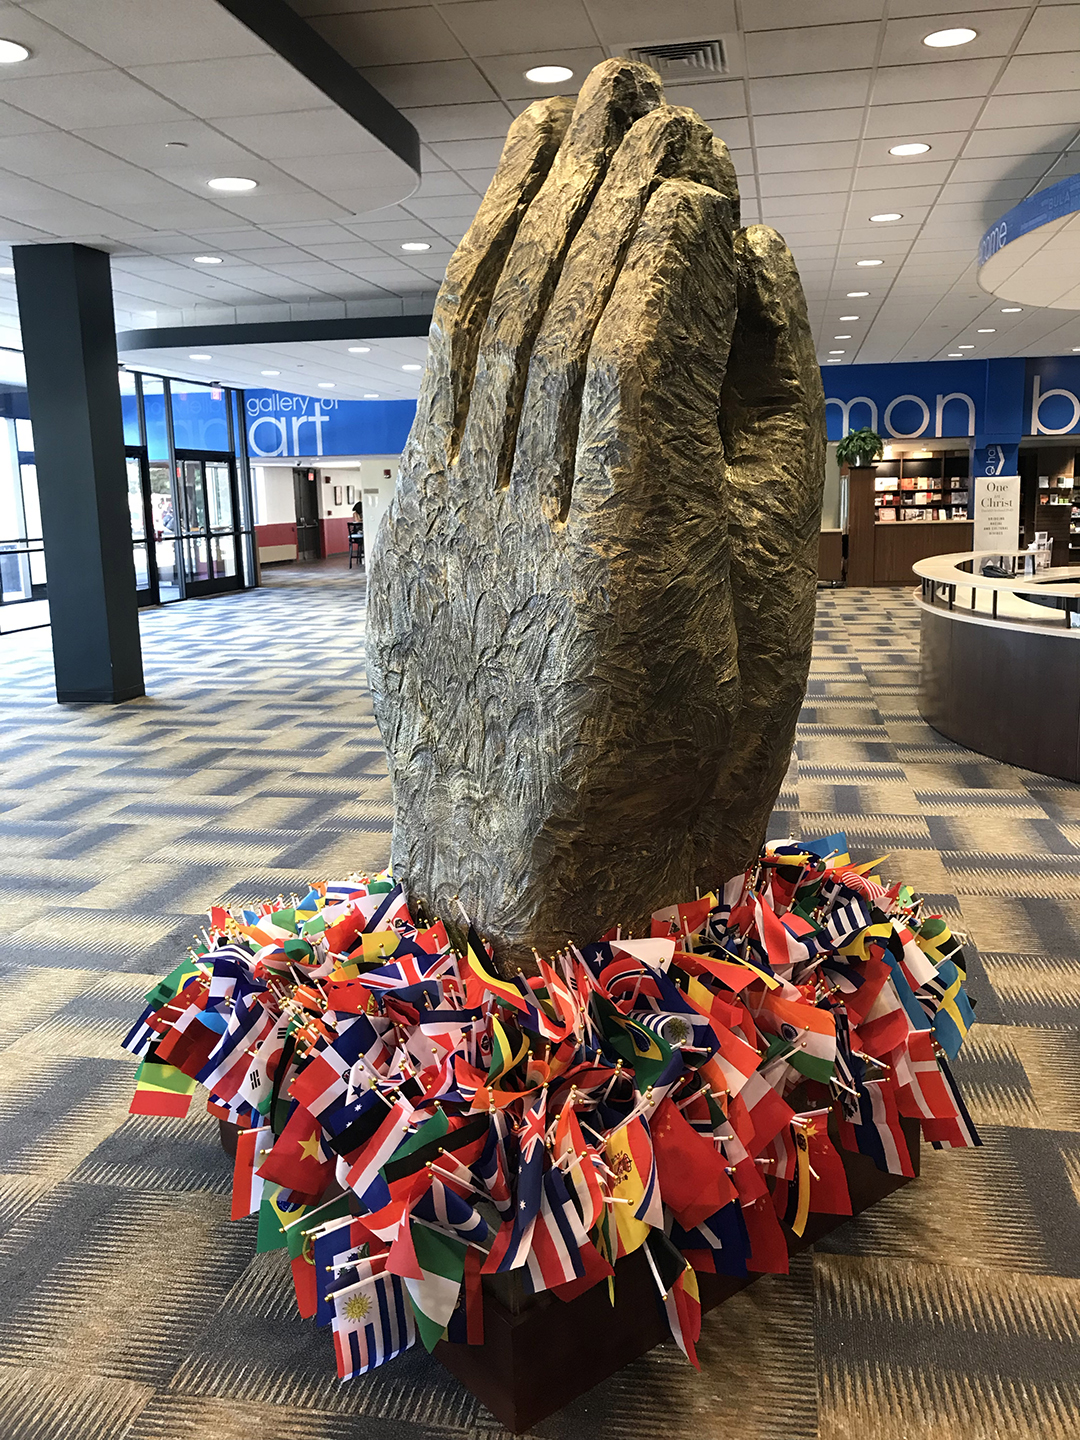 prayer sculpture with flags